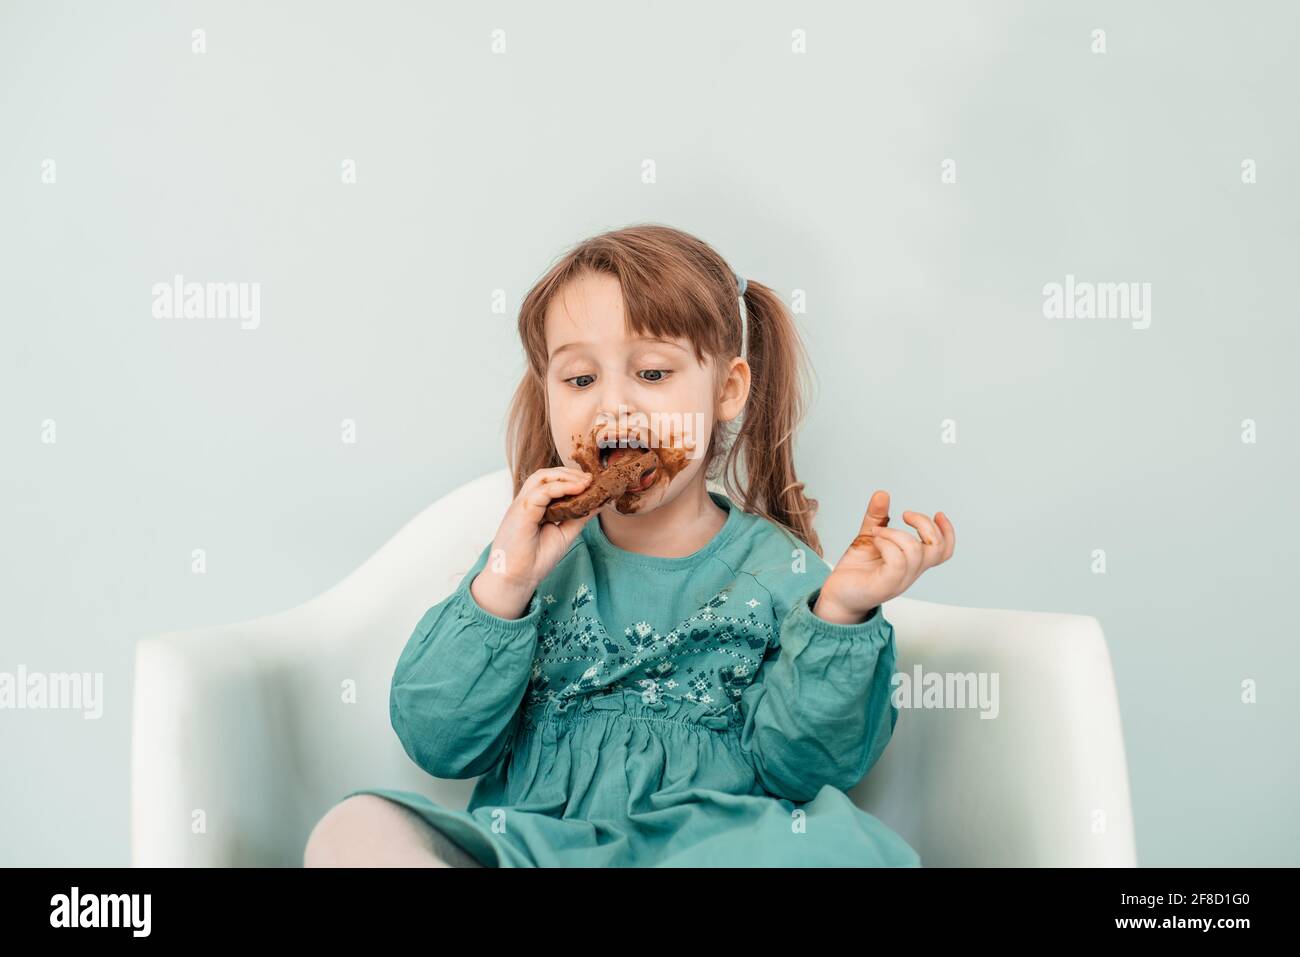 Adorable baby girl with face covered in chocolate Stock Photo